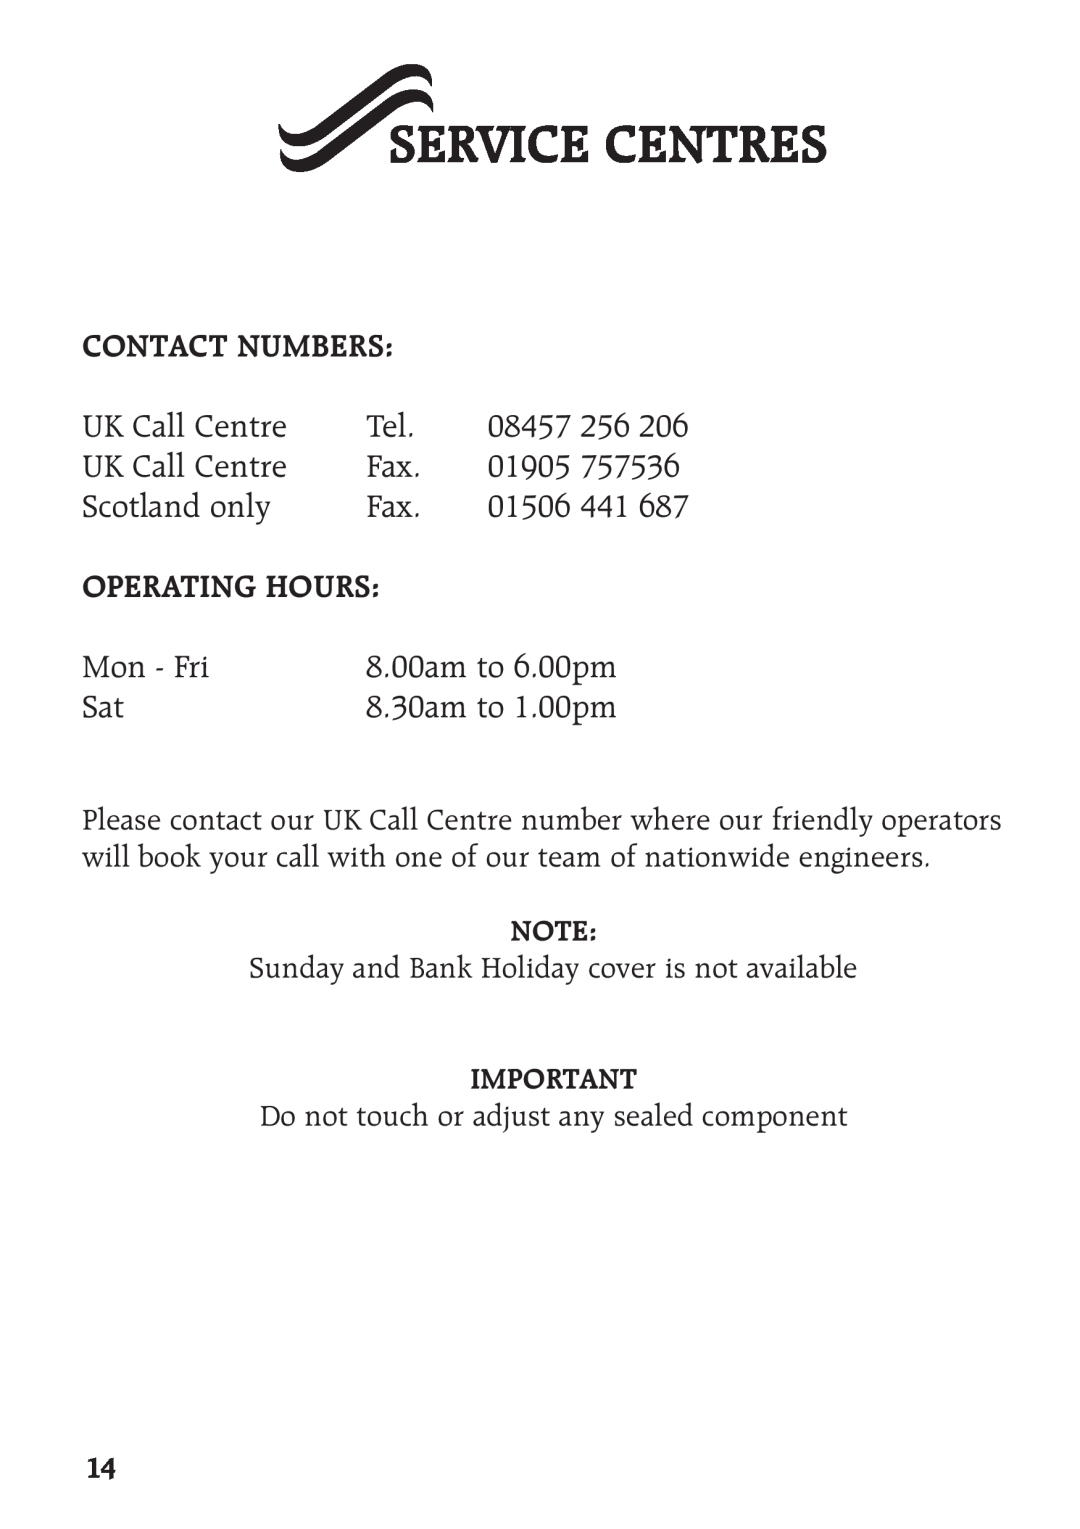 Compex Technologies 400 Service Centres, Contact Numbers, UK Call Centre, 01905, Scotland only, Operating Hours, Mon - Fri 